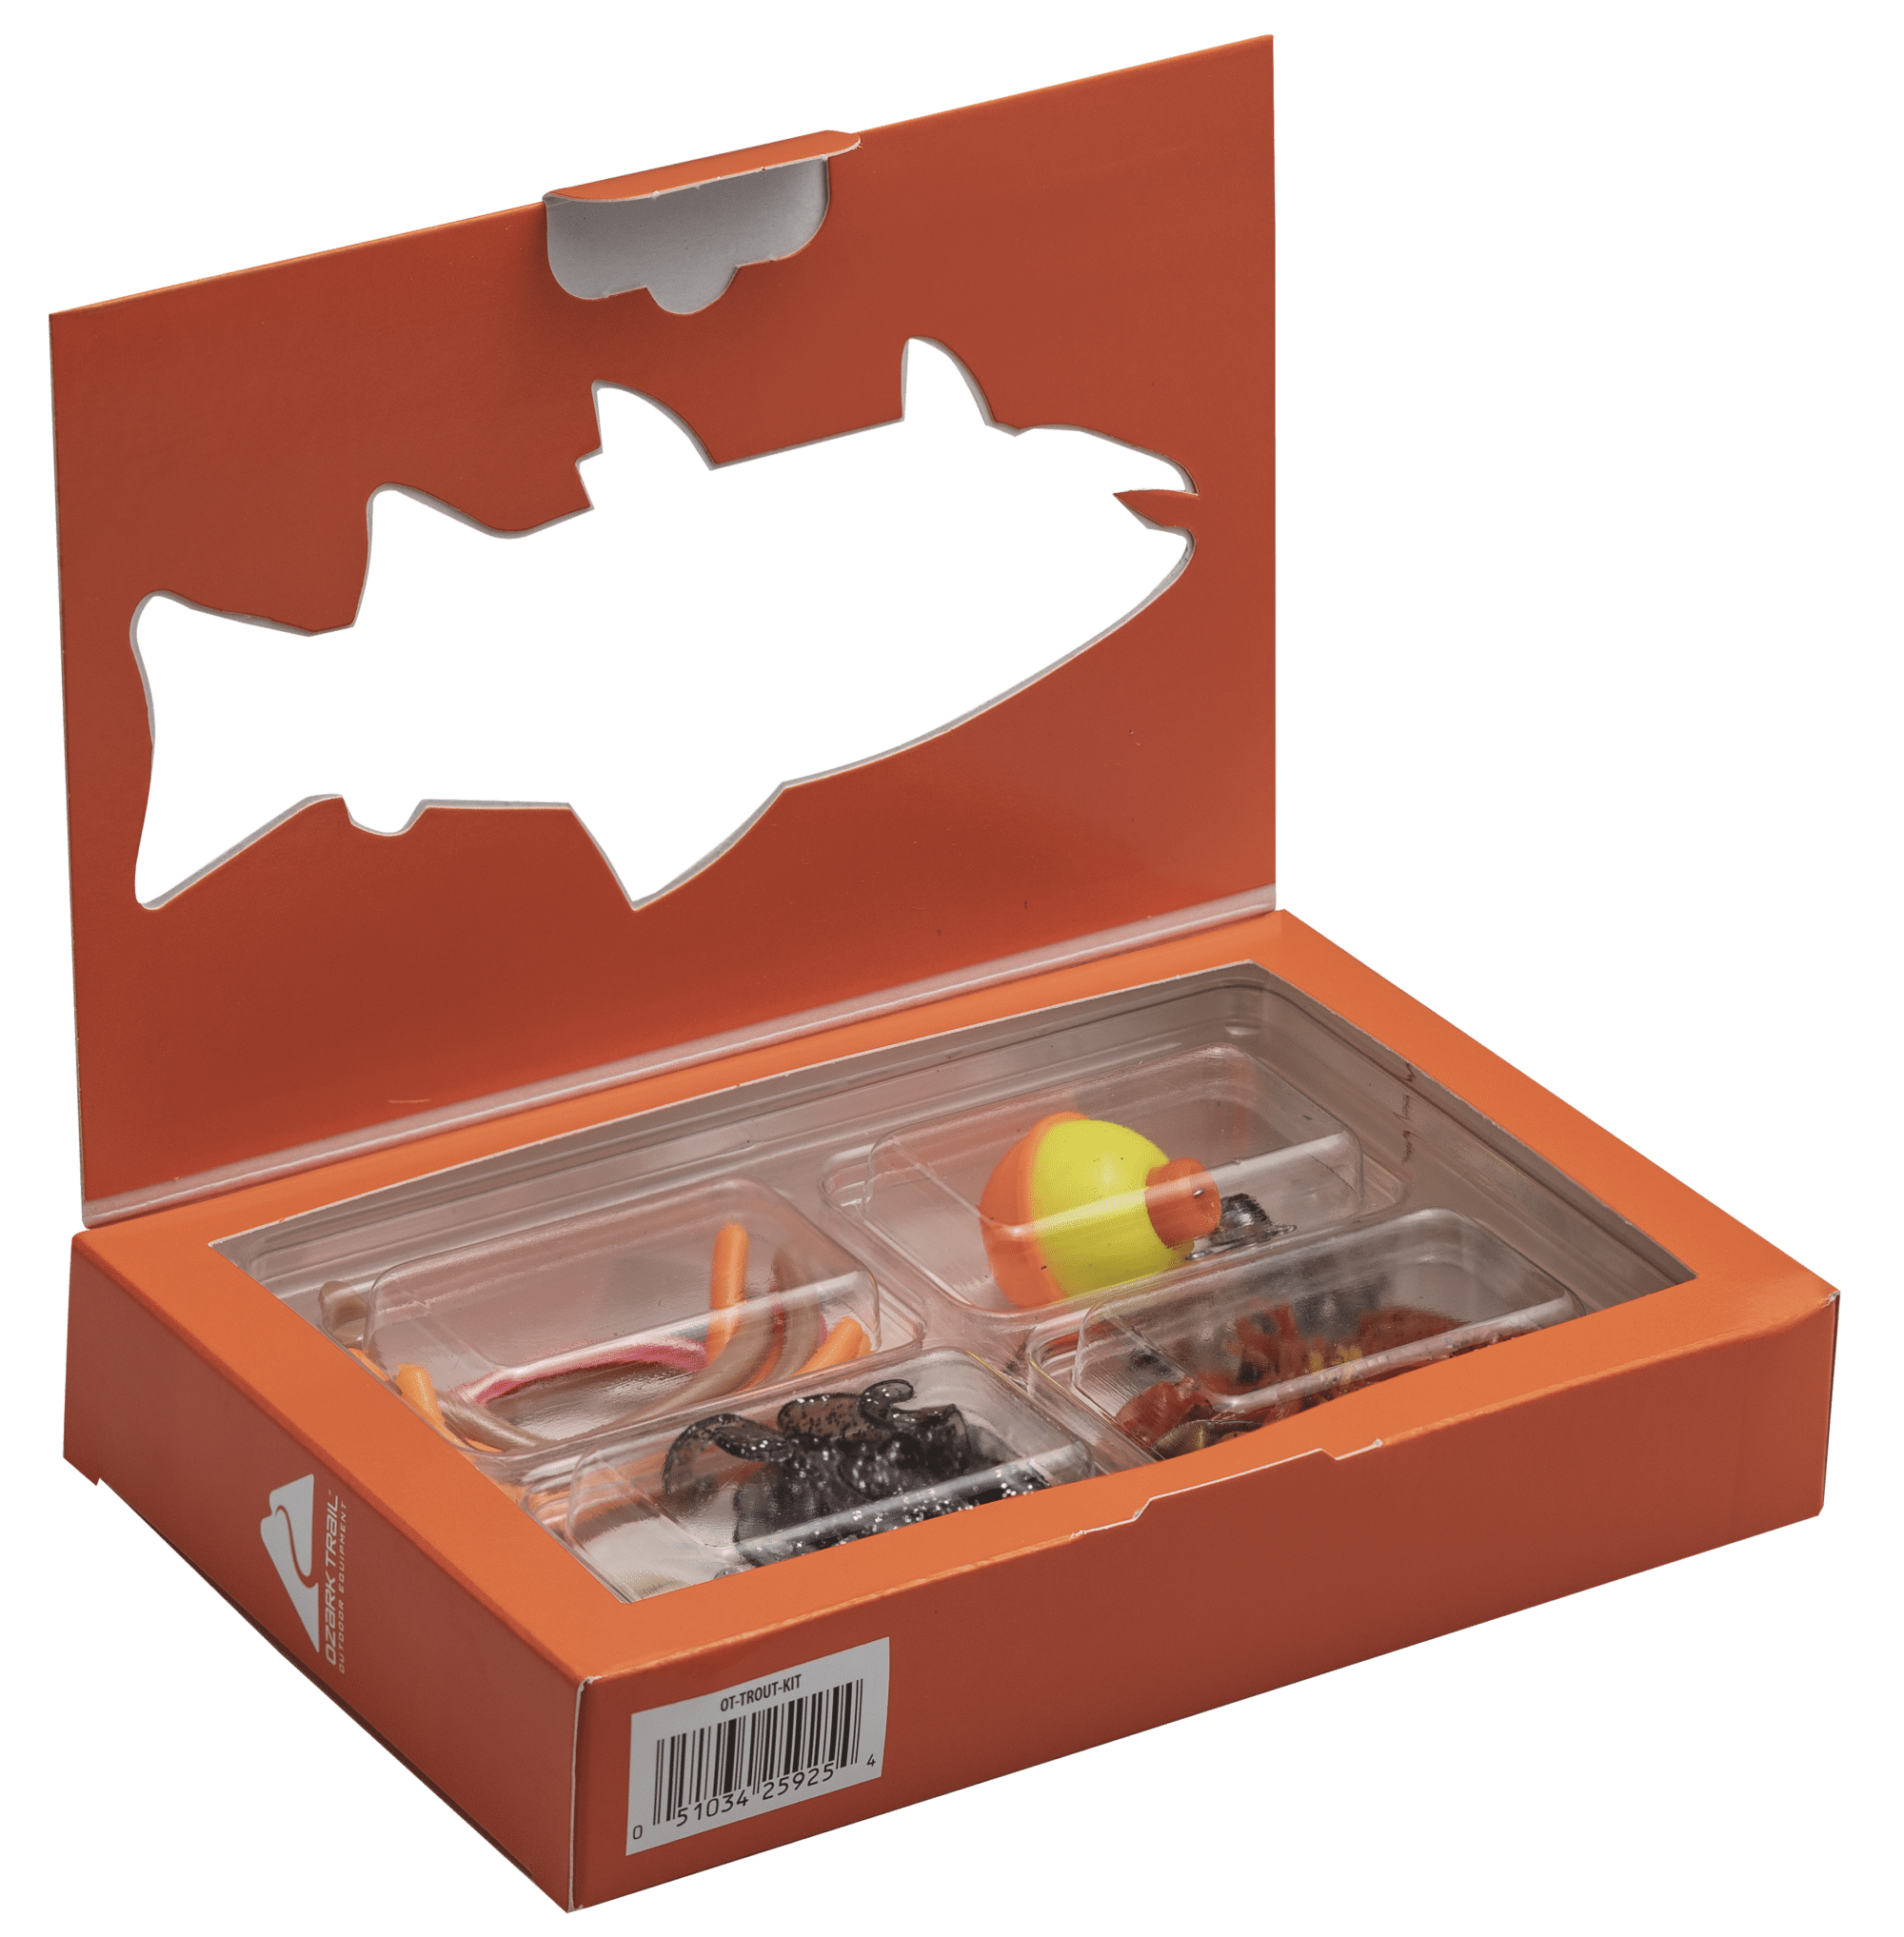 Hookup Baits - The TROUT BOXES ARE NOW FOR SALE AT OUR ONLINE